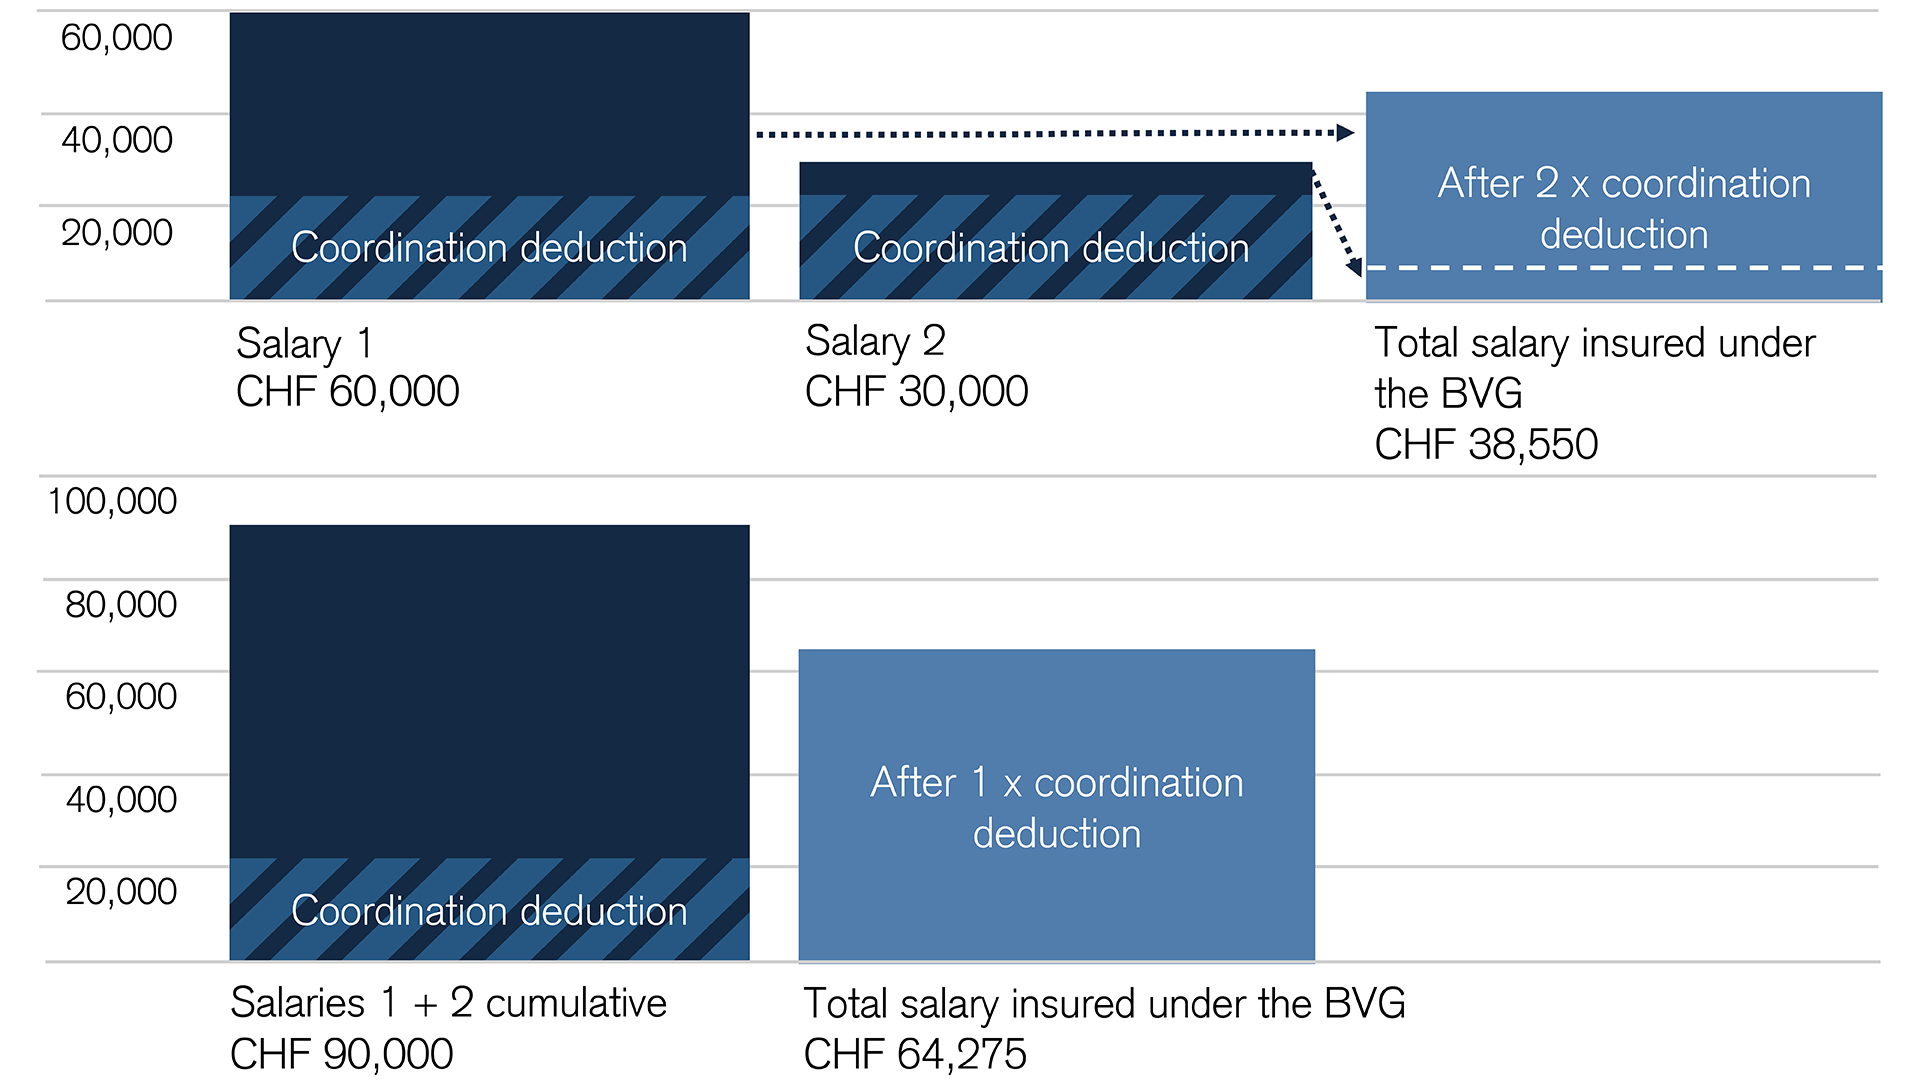 Sample calculation: Two salaries, both above the BVG minimum income required for enrollment